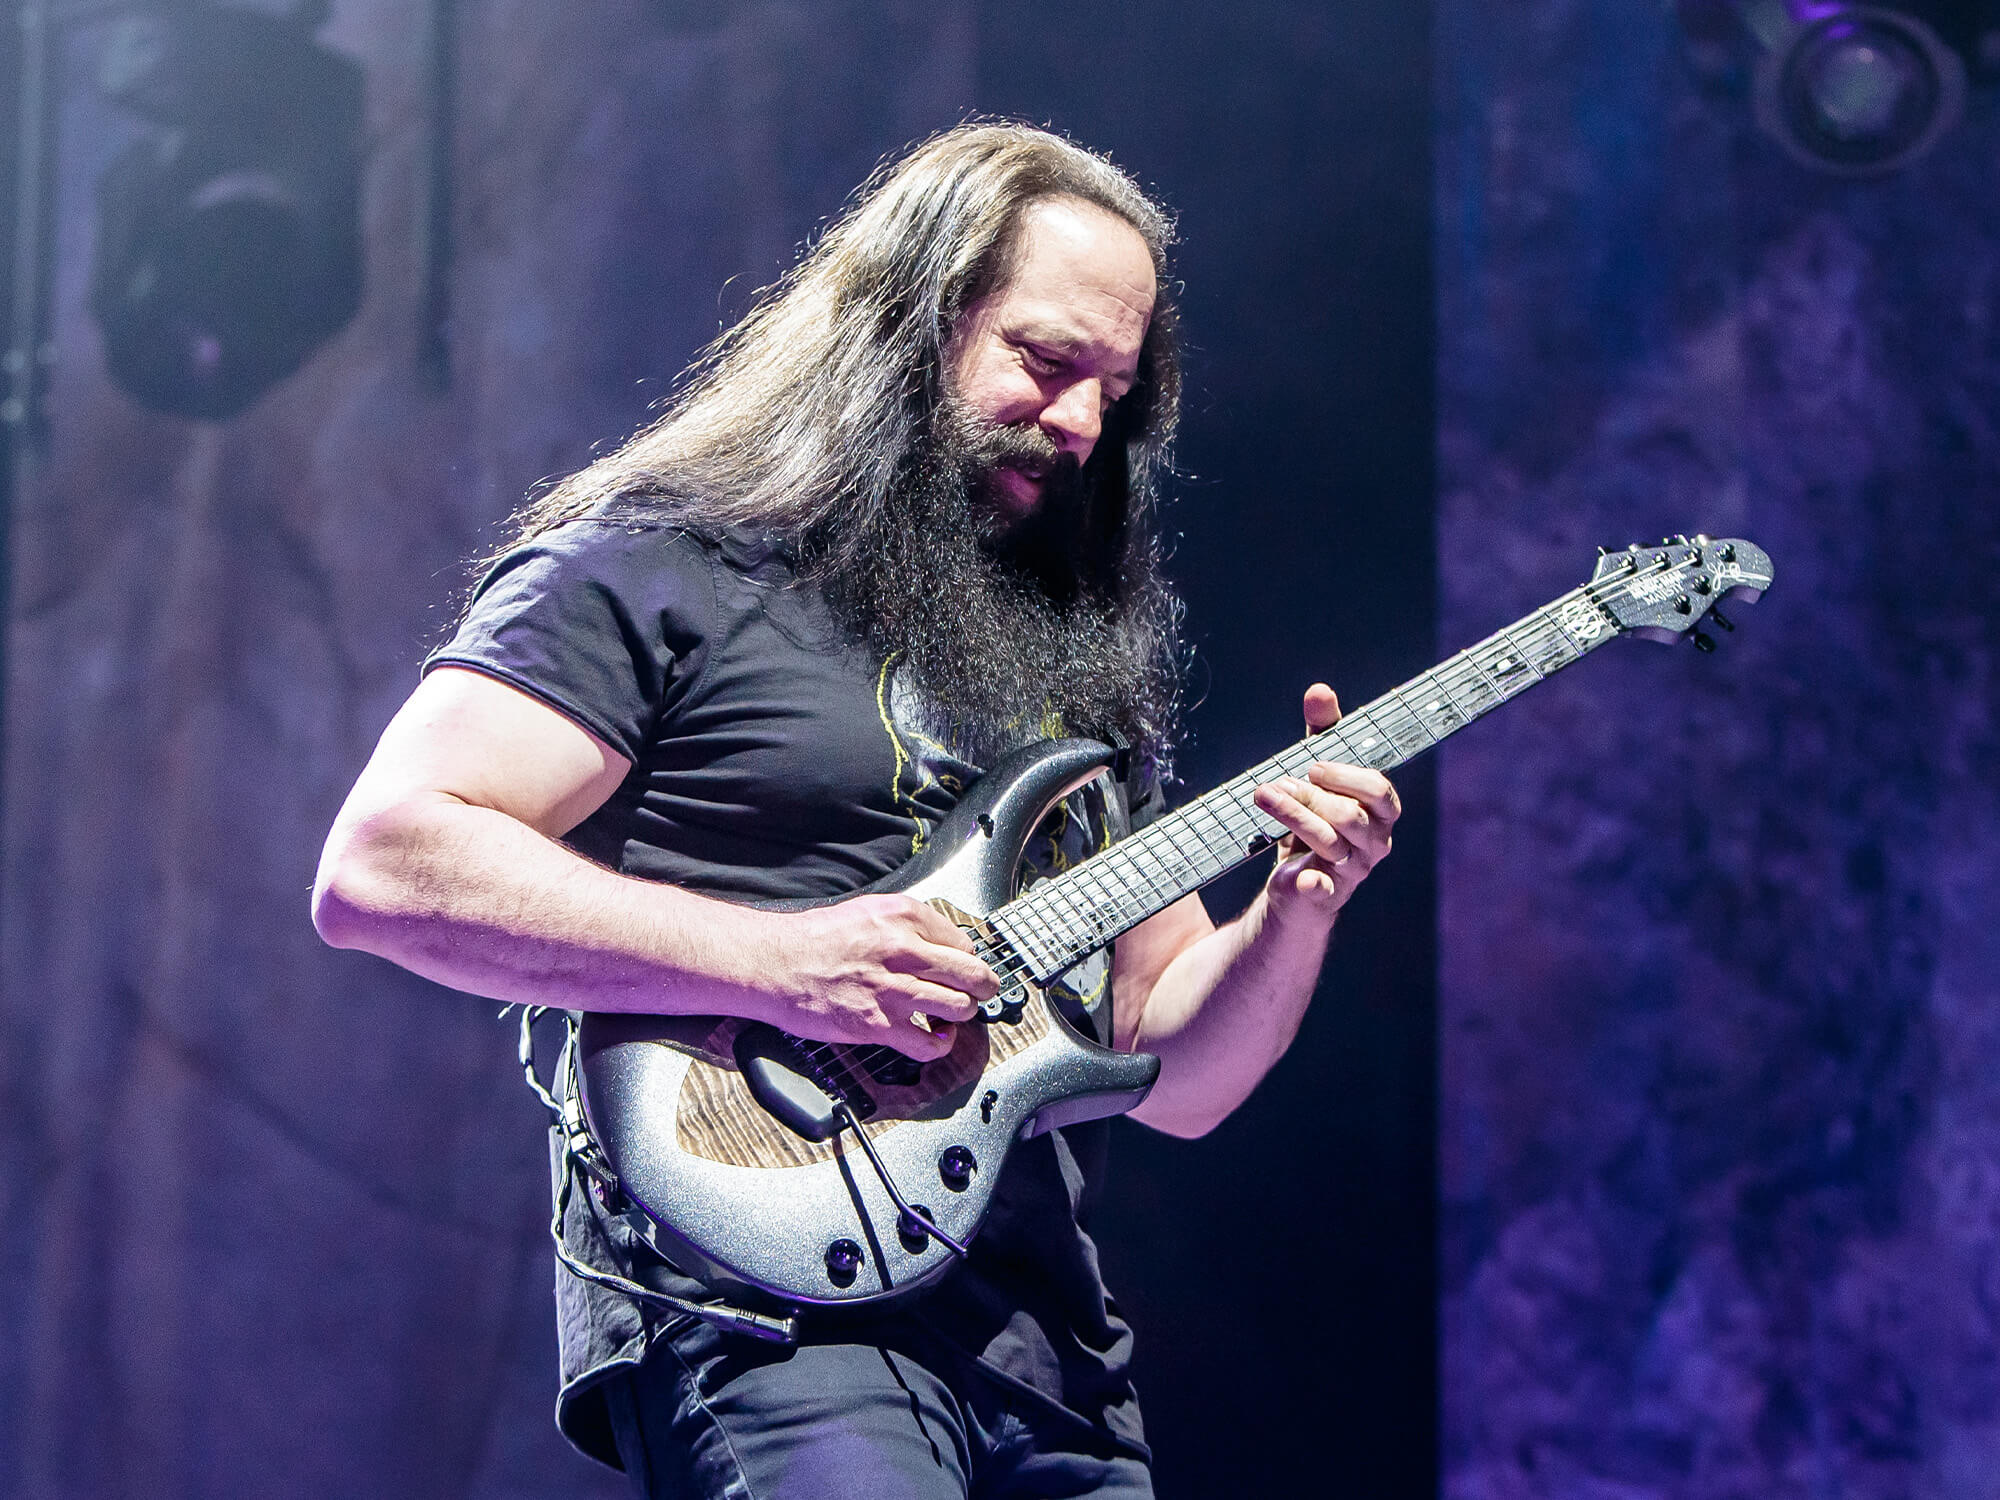 John Petrucci on stage playing an Ernie Ball Music Man electric guitar